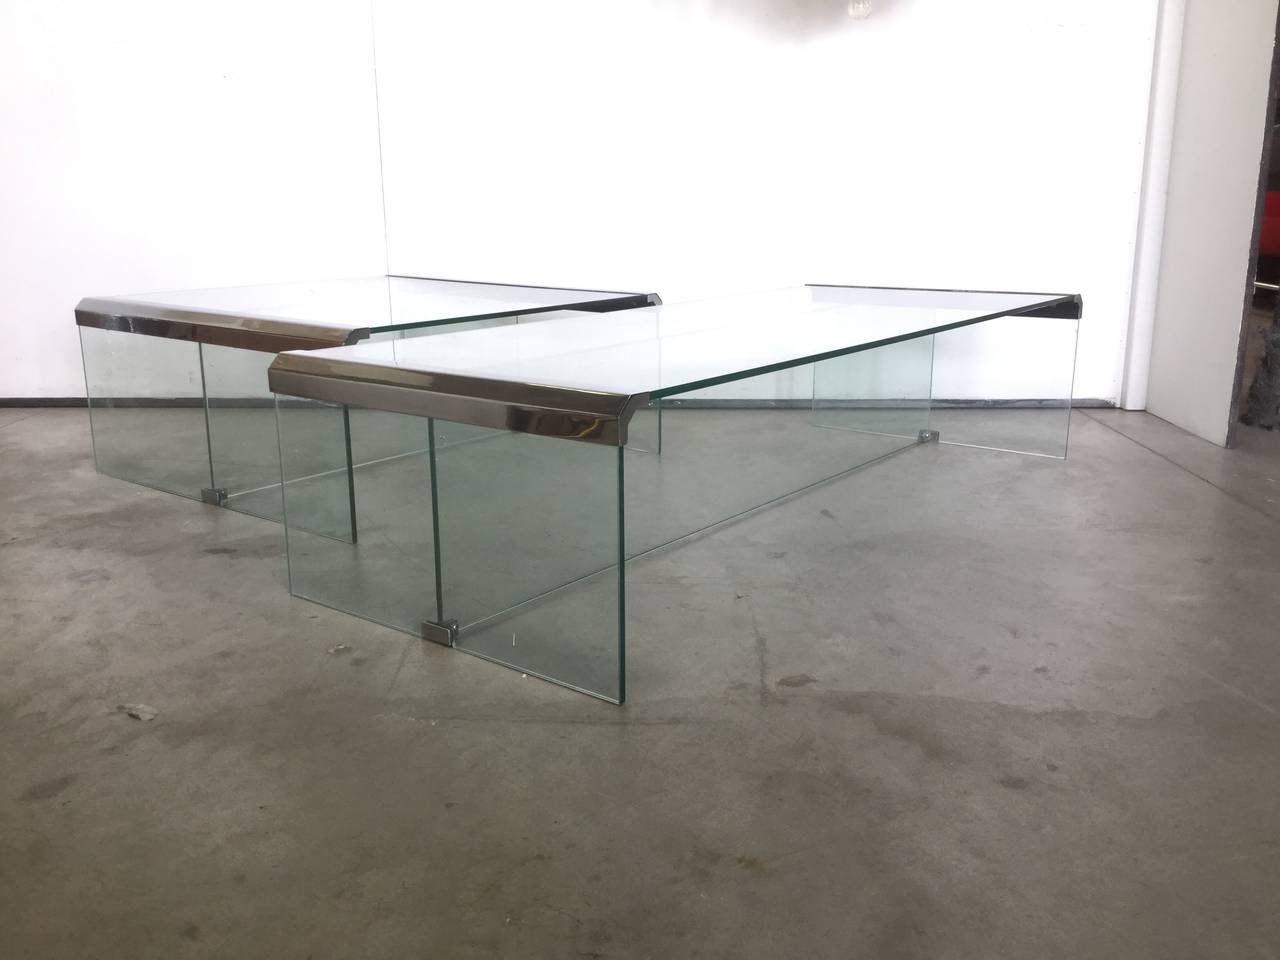 Beautiful set of two coffee tables in different size: The little one is cm 70 x cm 70 x H cm 45, the big one is cm 70 x cm 120 x H cm 45.
The tables are made of thick glass plates linked by chrome metal connections.
Manufactured by Fontana Arte in